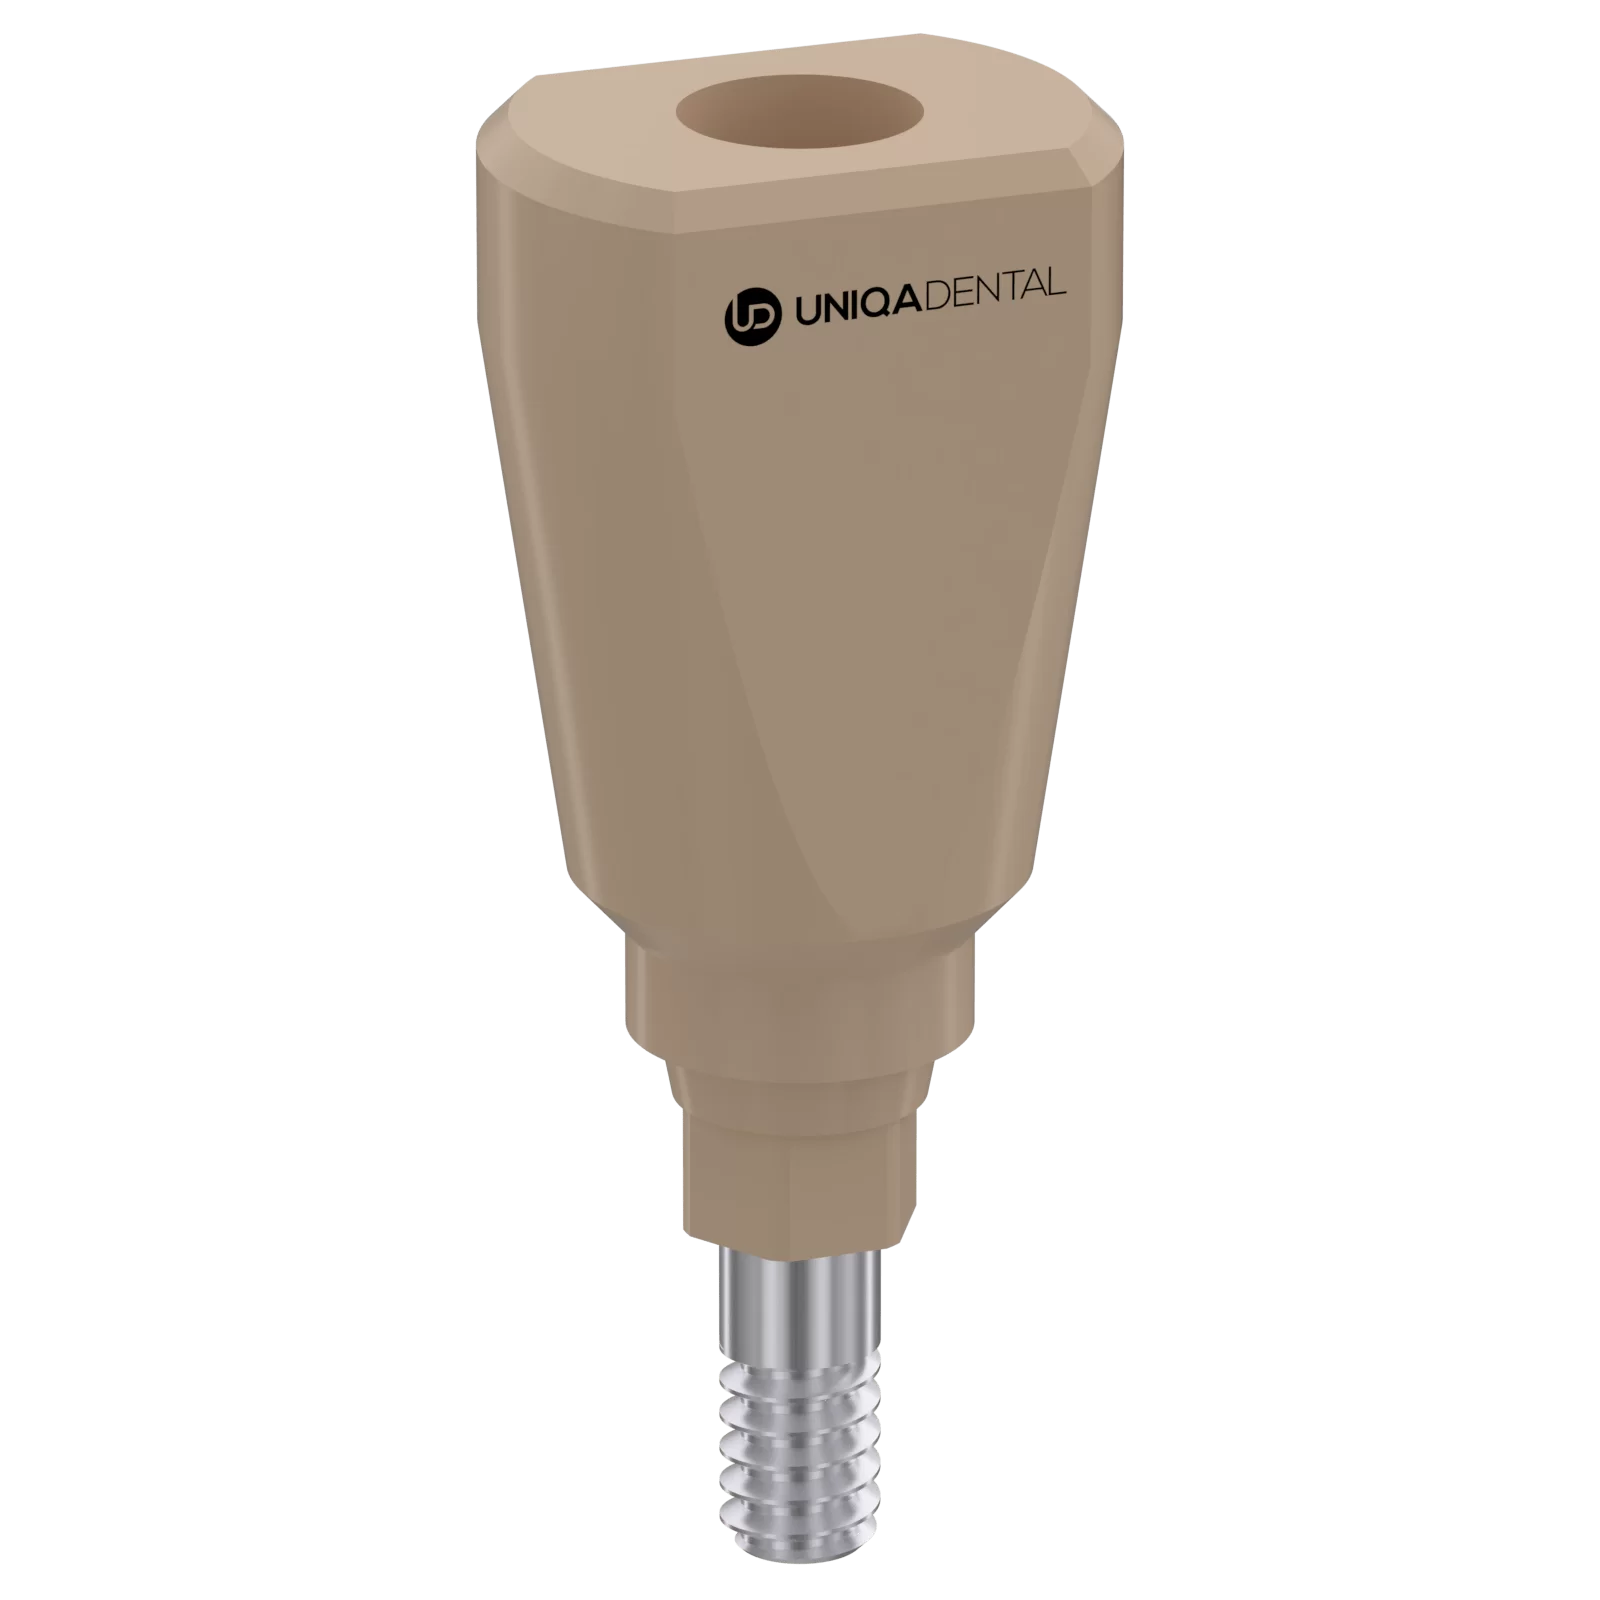 Scan body implant level h9 for hiossen® conical connection et™ system mini / np sbi osm0009